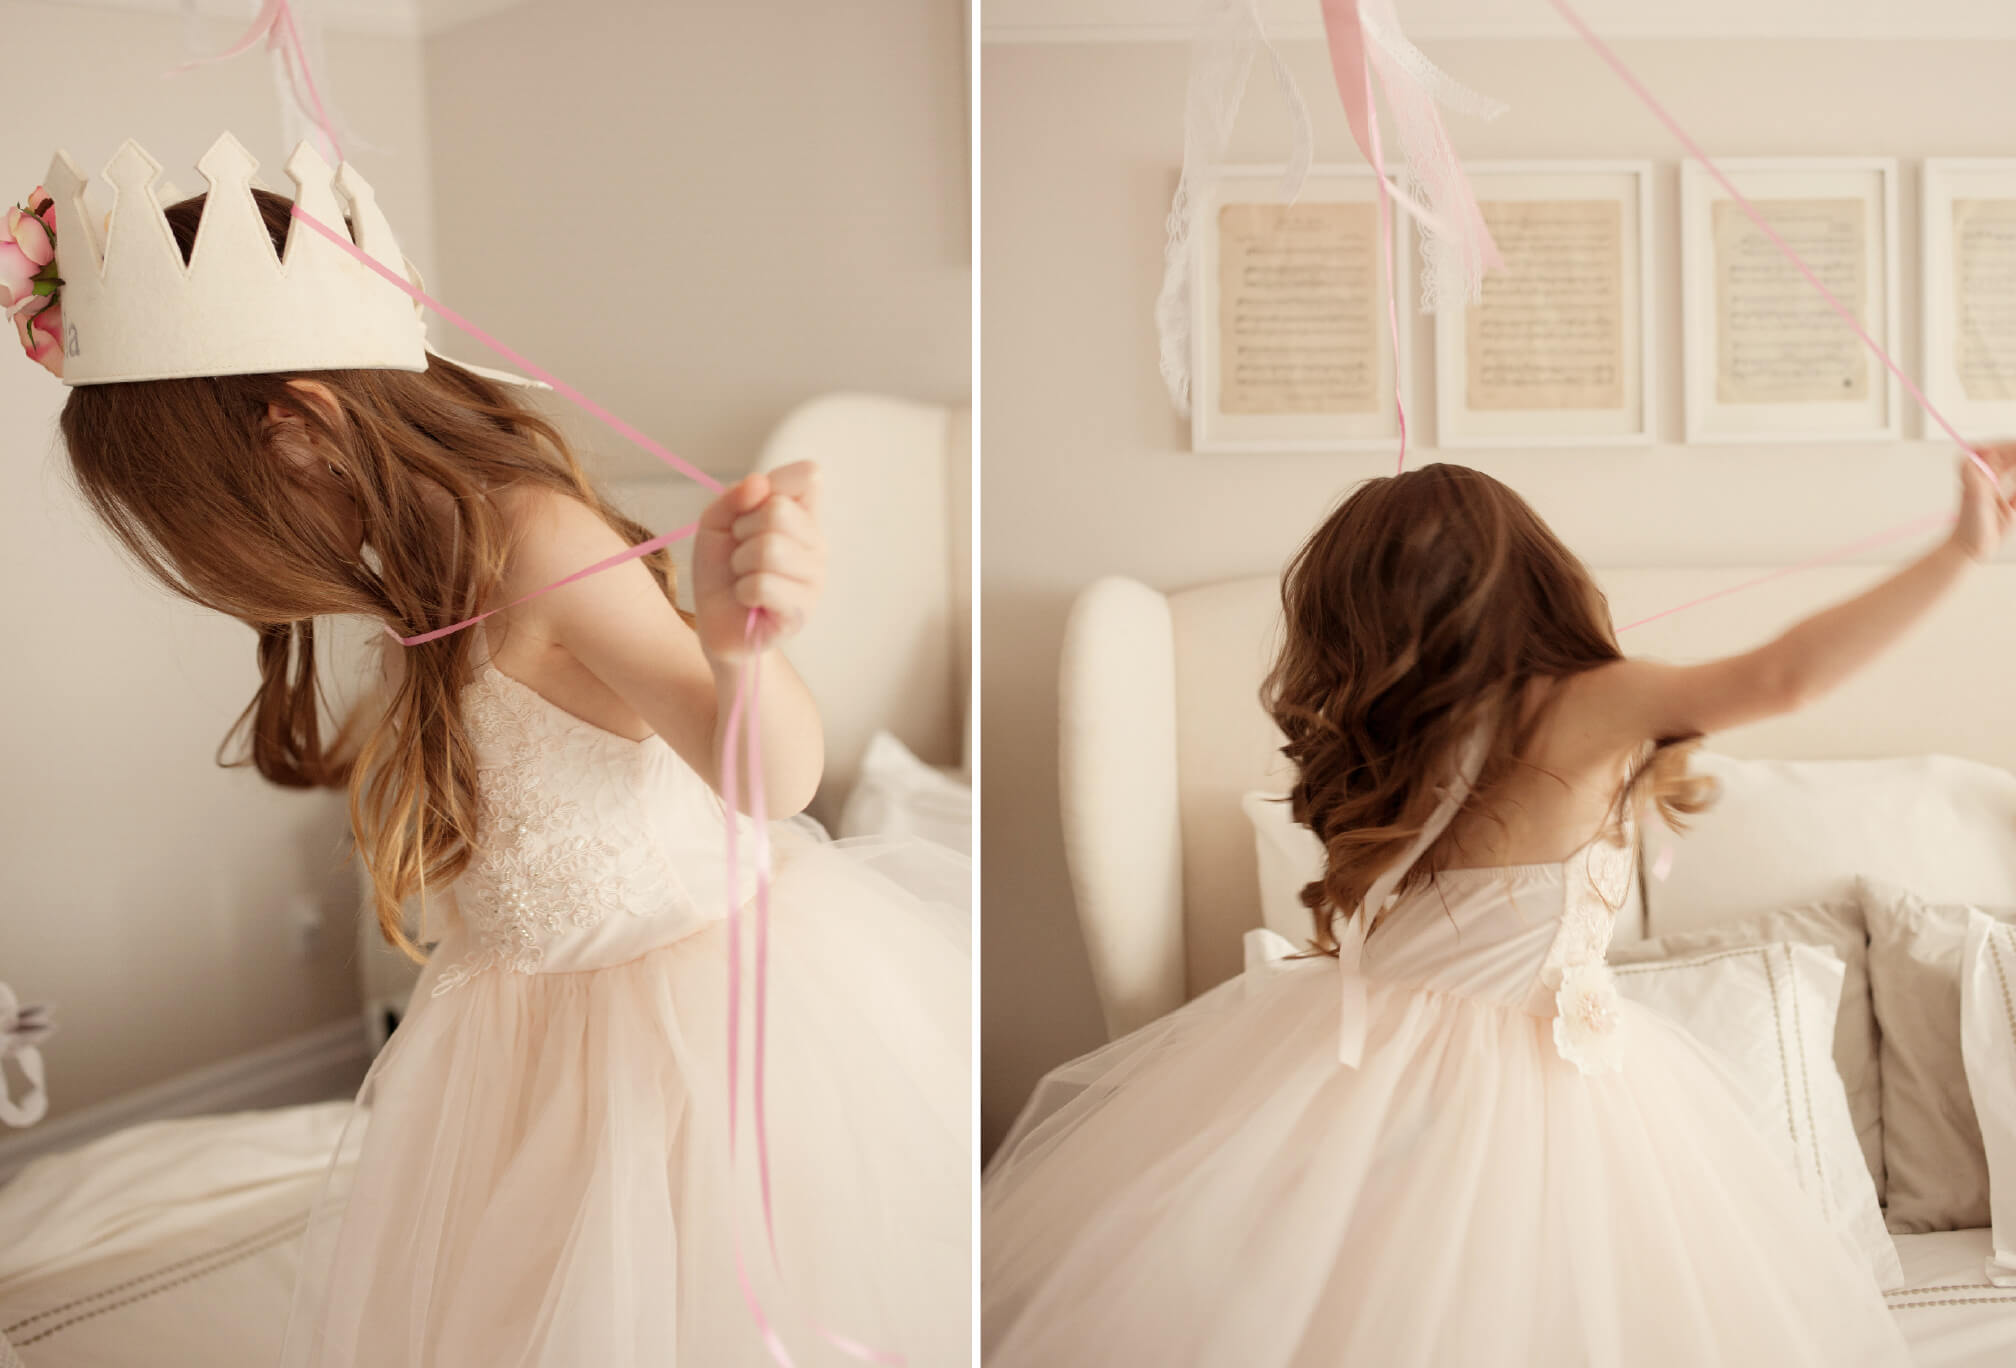 little girl photo shoot with balloons